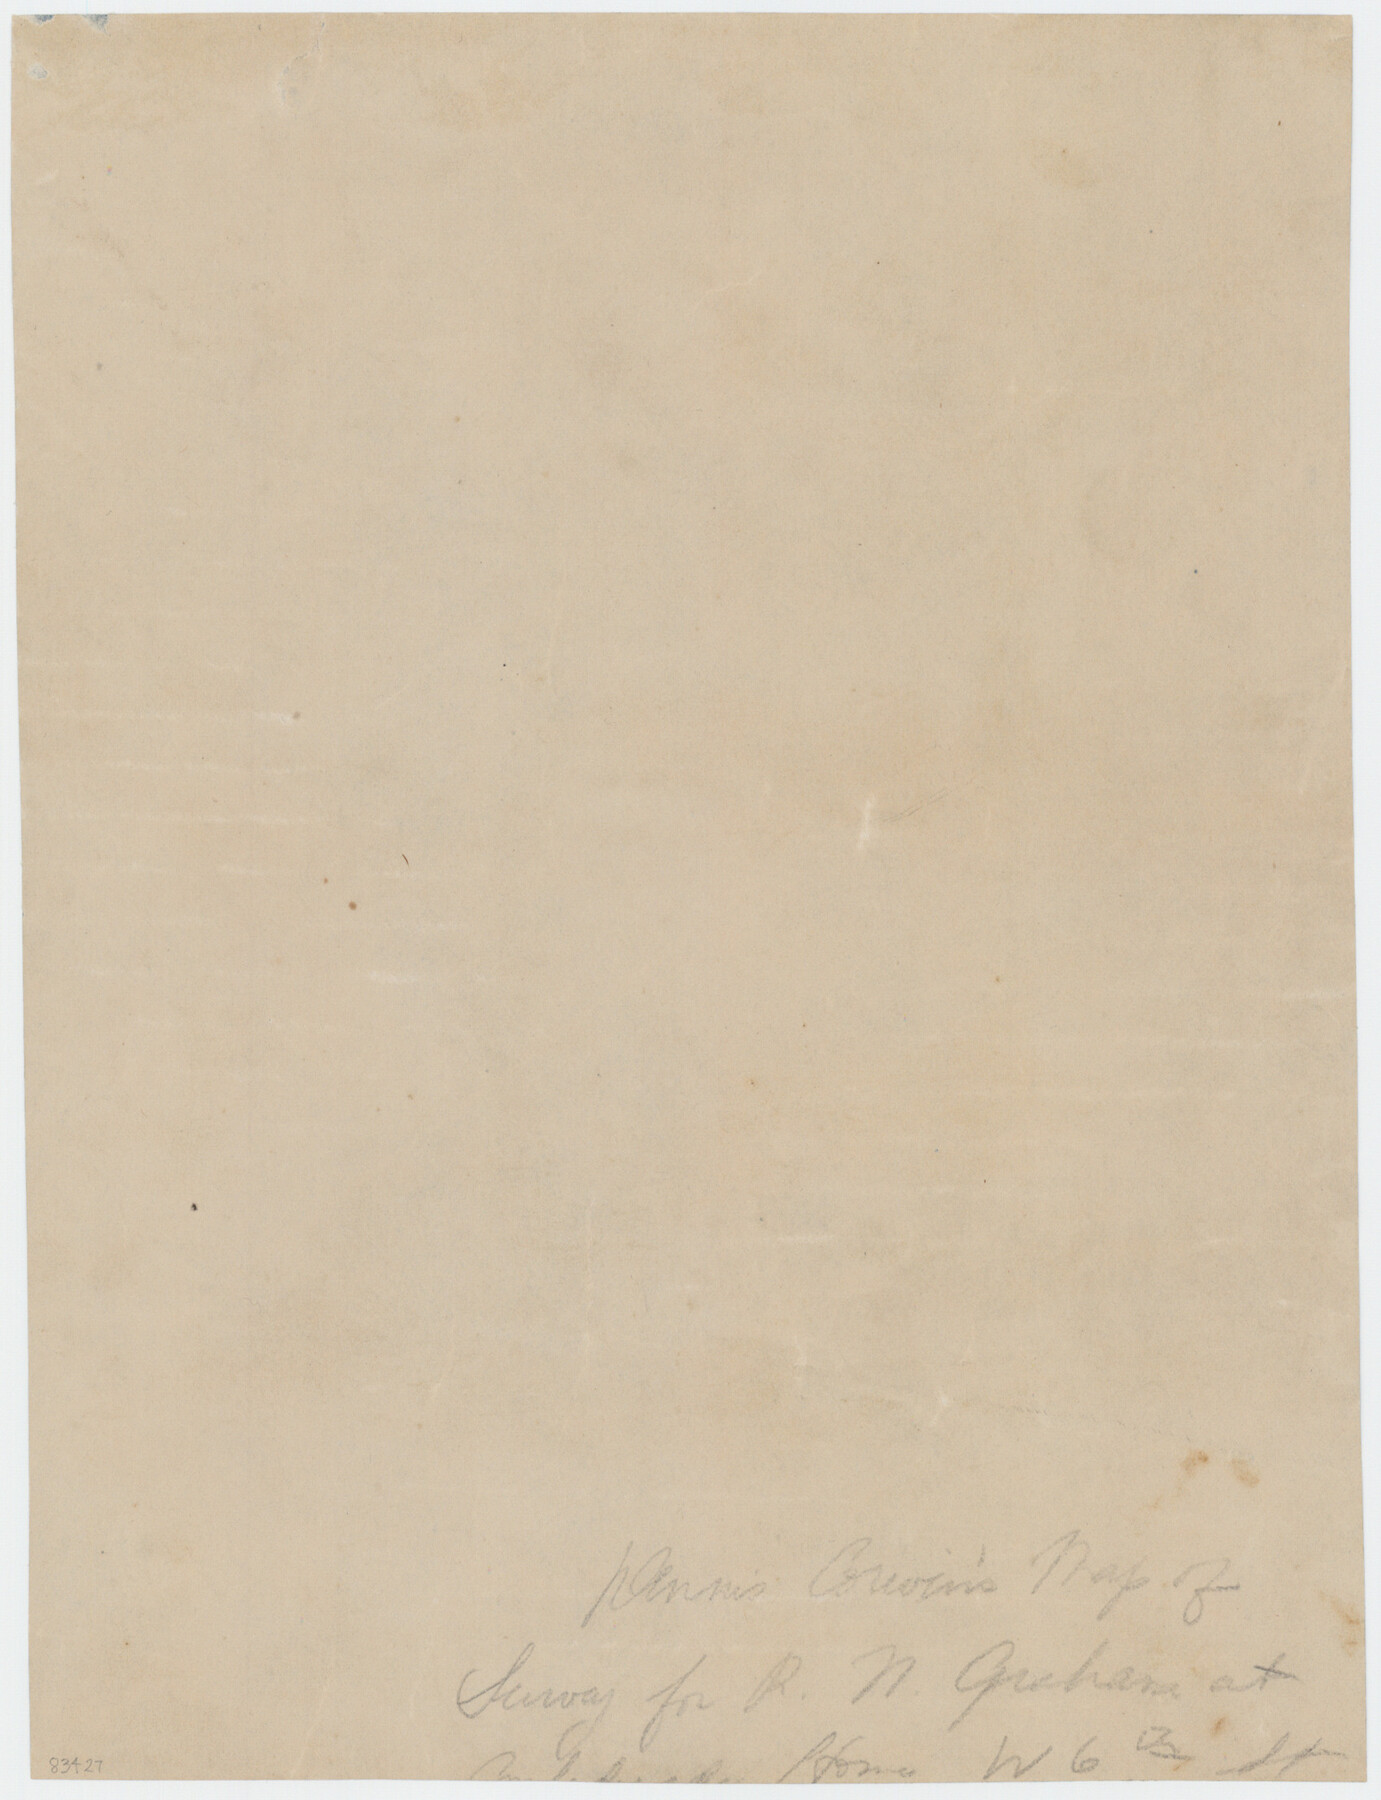 83427, [Dennis Corwin's Map of Survey for R. N. Graham], Maddox Collection